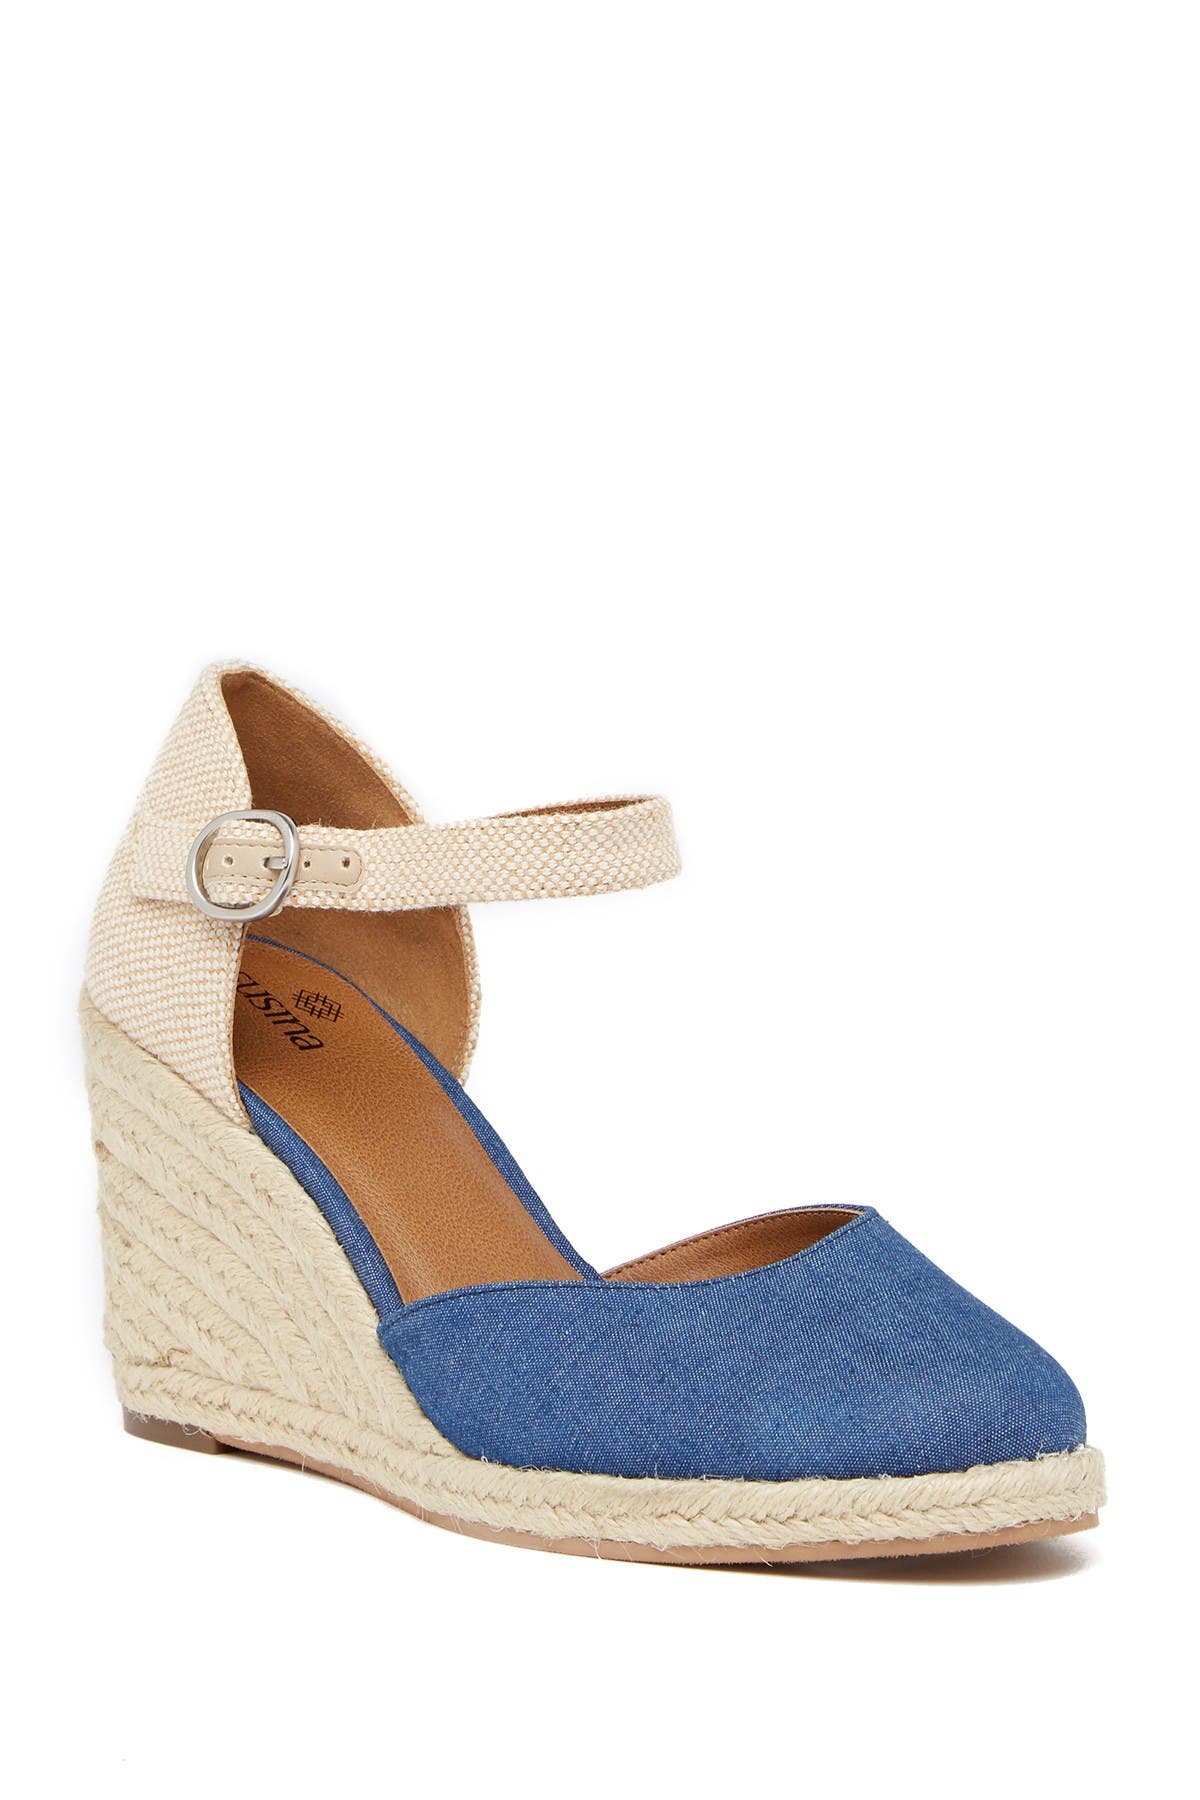 SUSINA | Lily Ankle Strap Wedge Sandal 